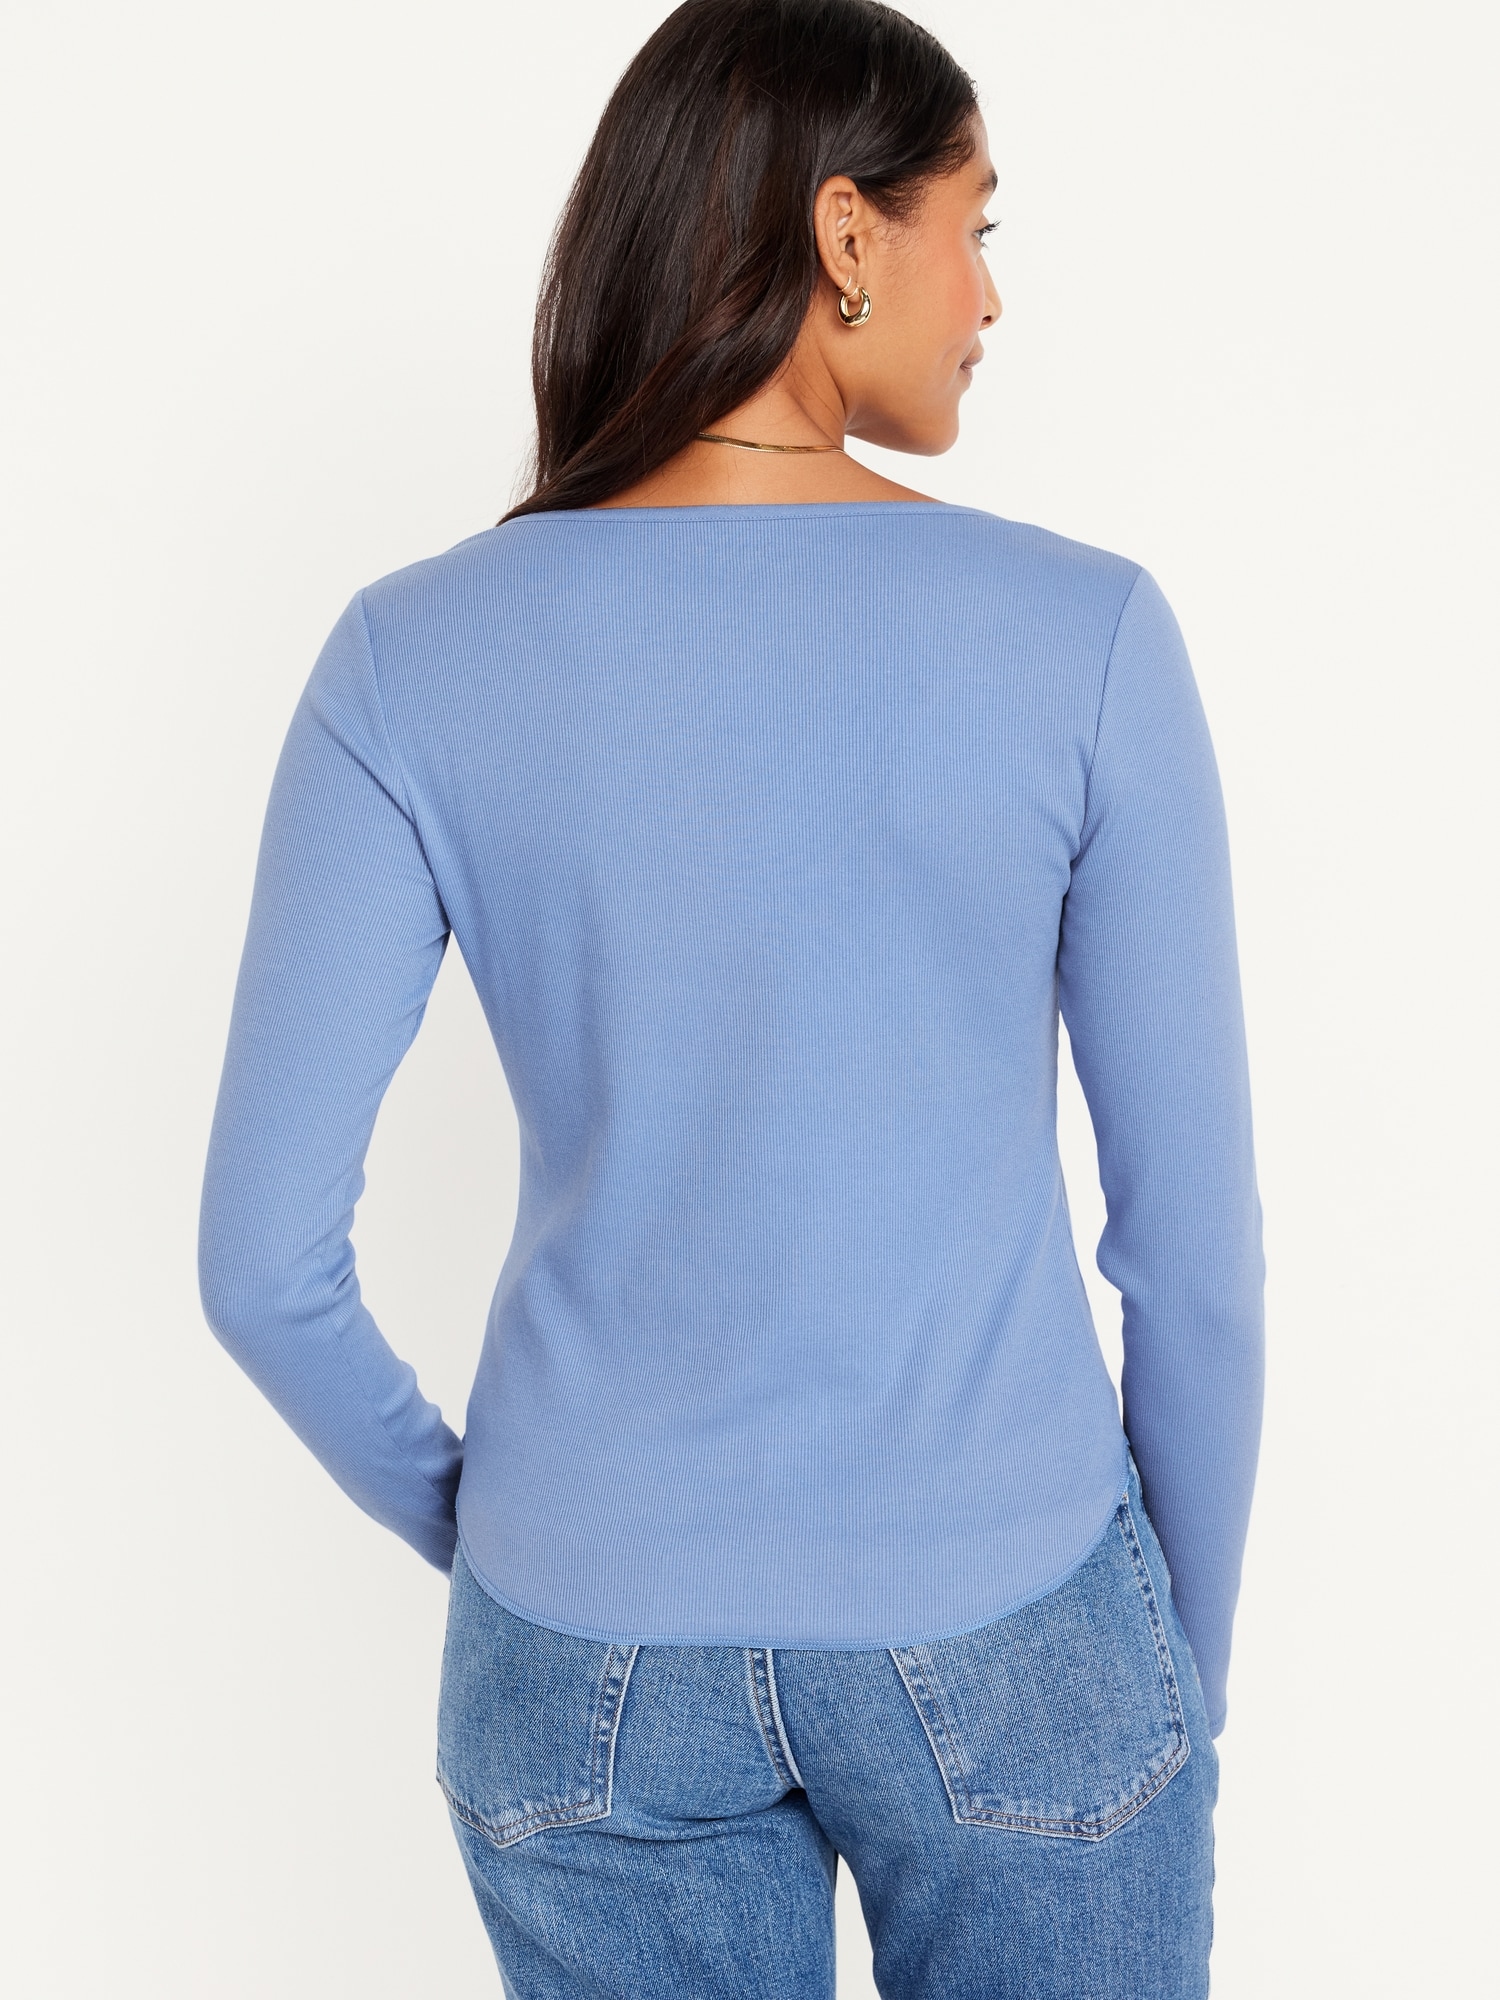 Fitted Long-Sleeve Rib-Knit T-Shirt | Women Old for Navy